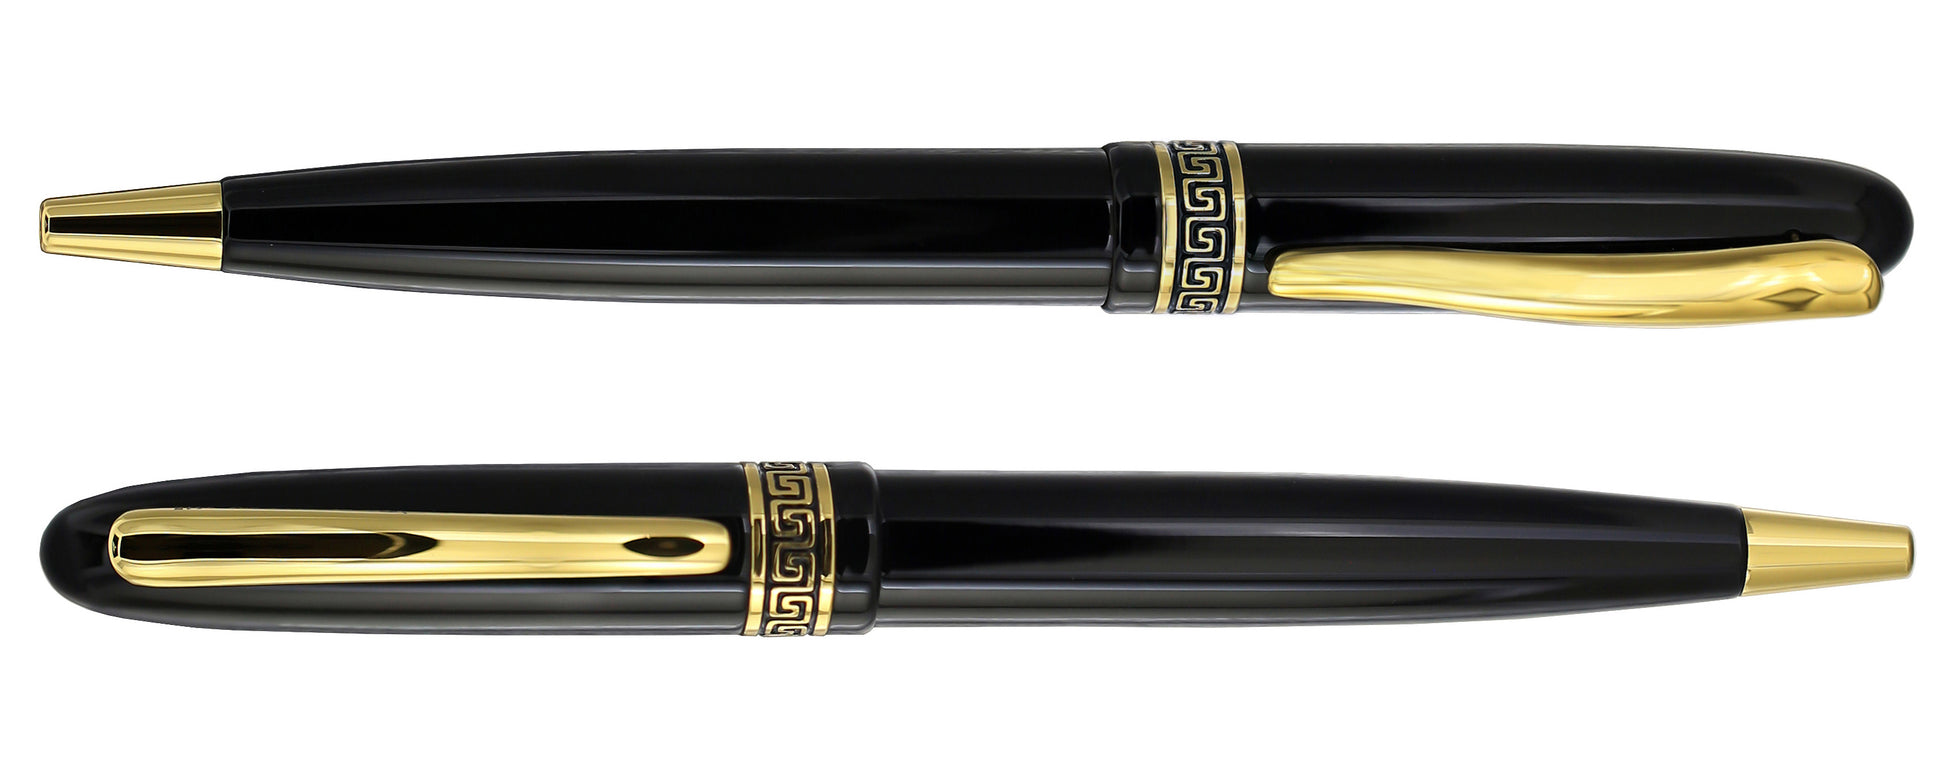 Xezo - Comparison between the front view and the 3/4 view of the Phantom Classic Black B ballpoint pens